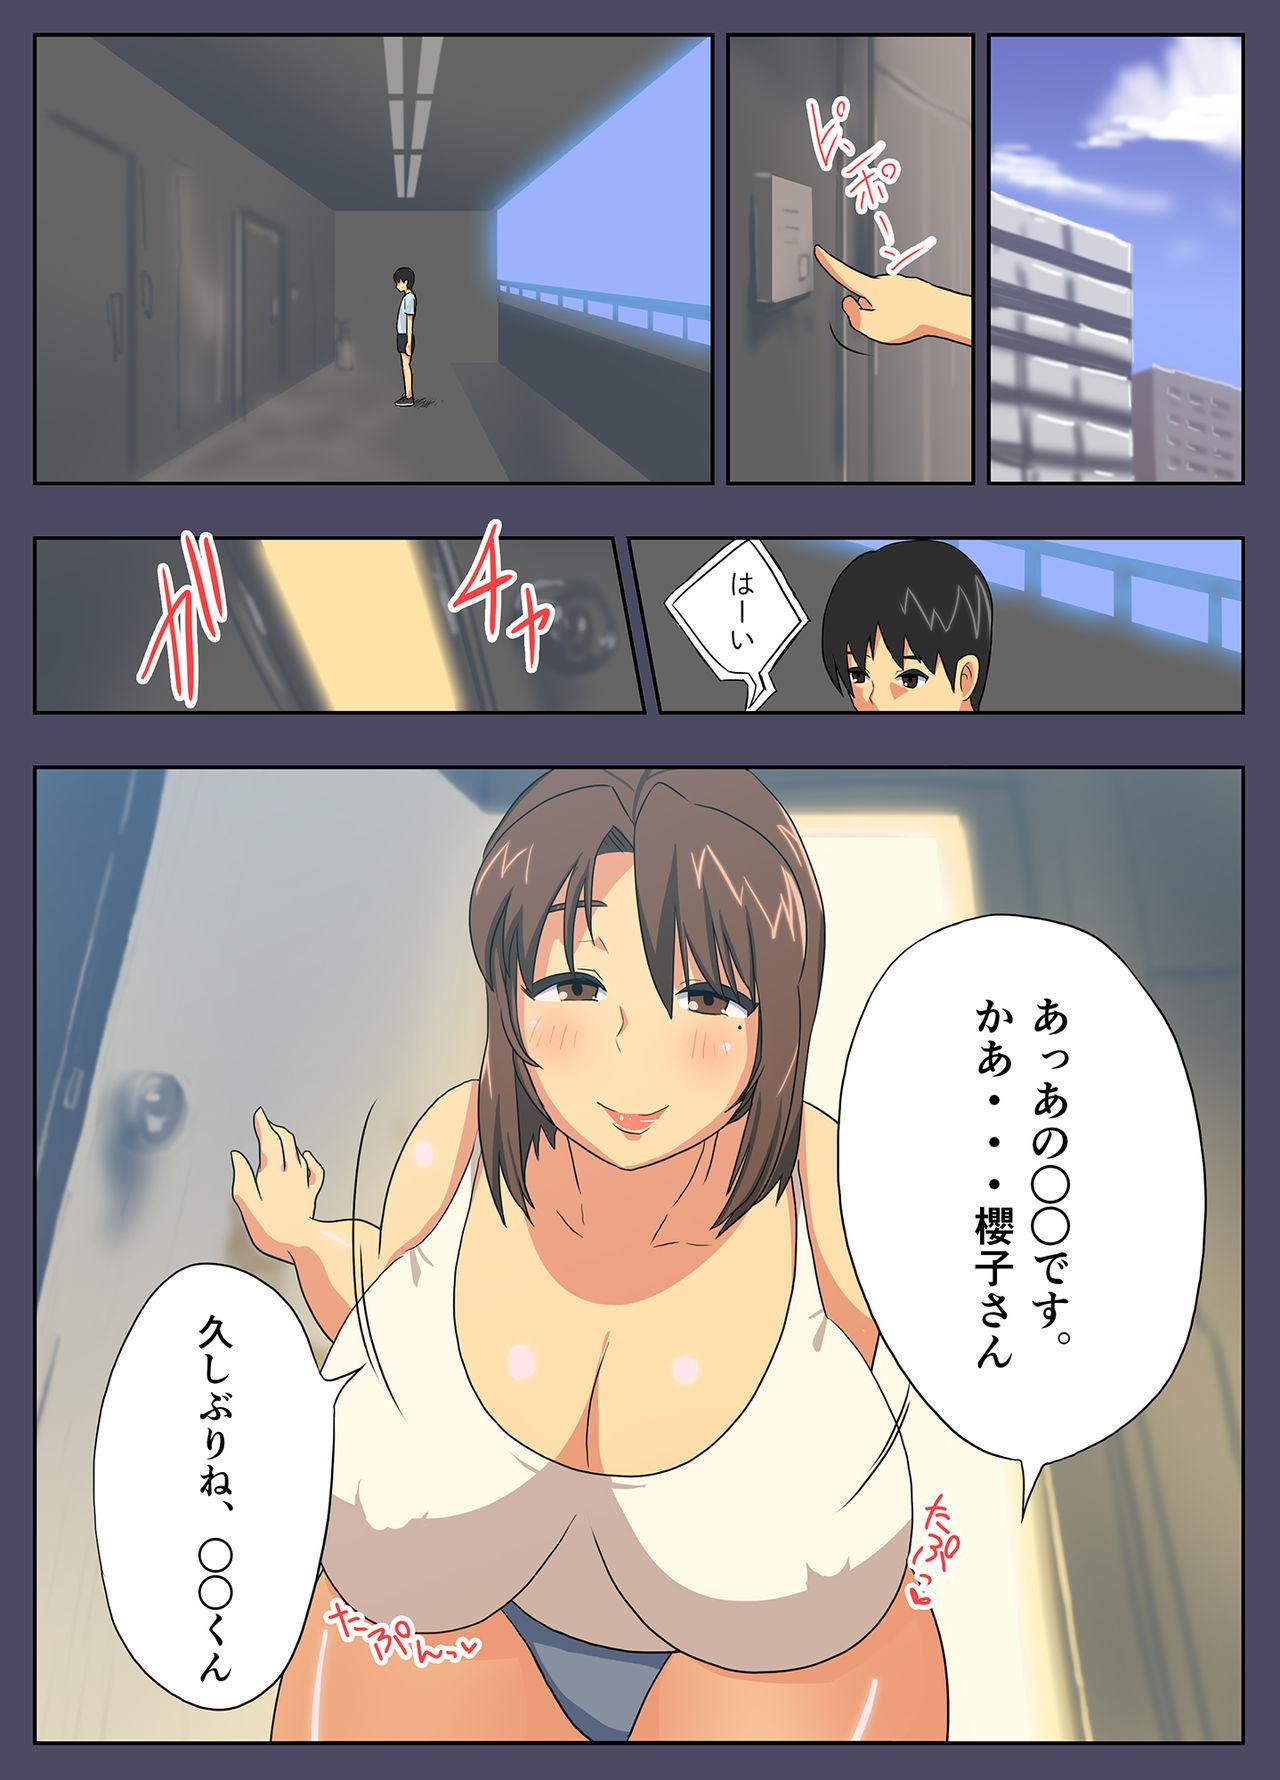 The My mother is impossible with such a lewd body! - Original Transexual - Page 2